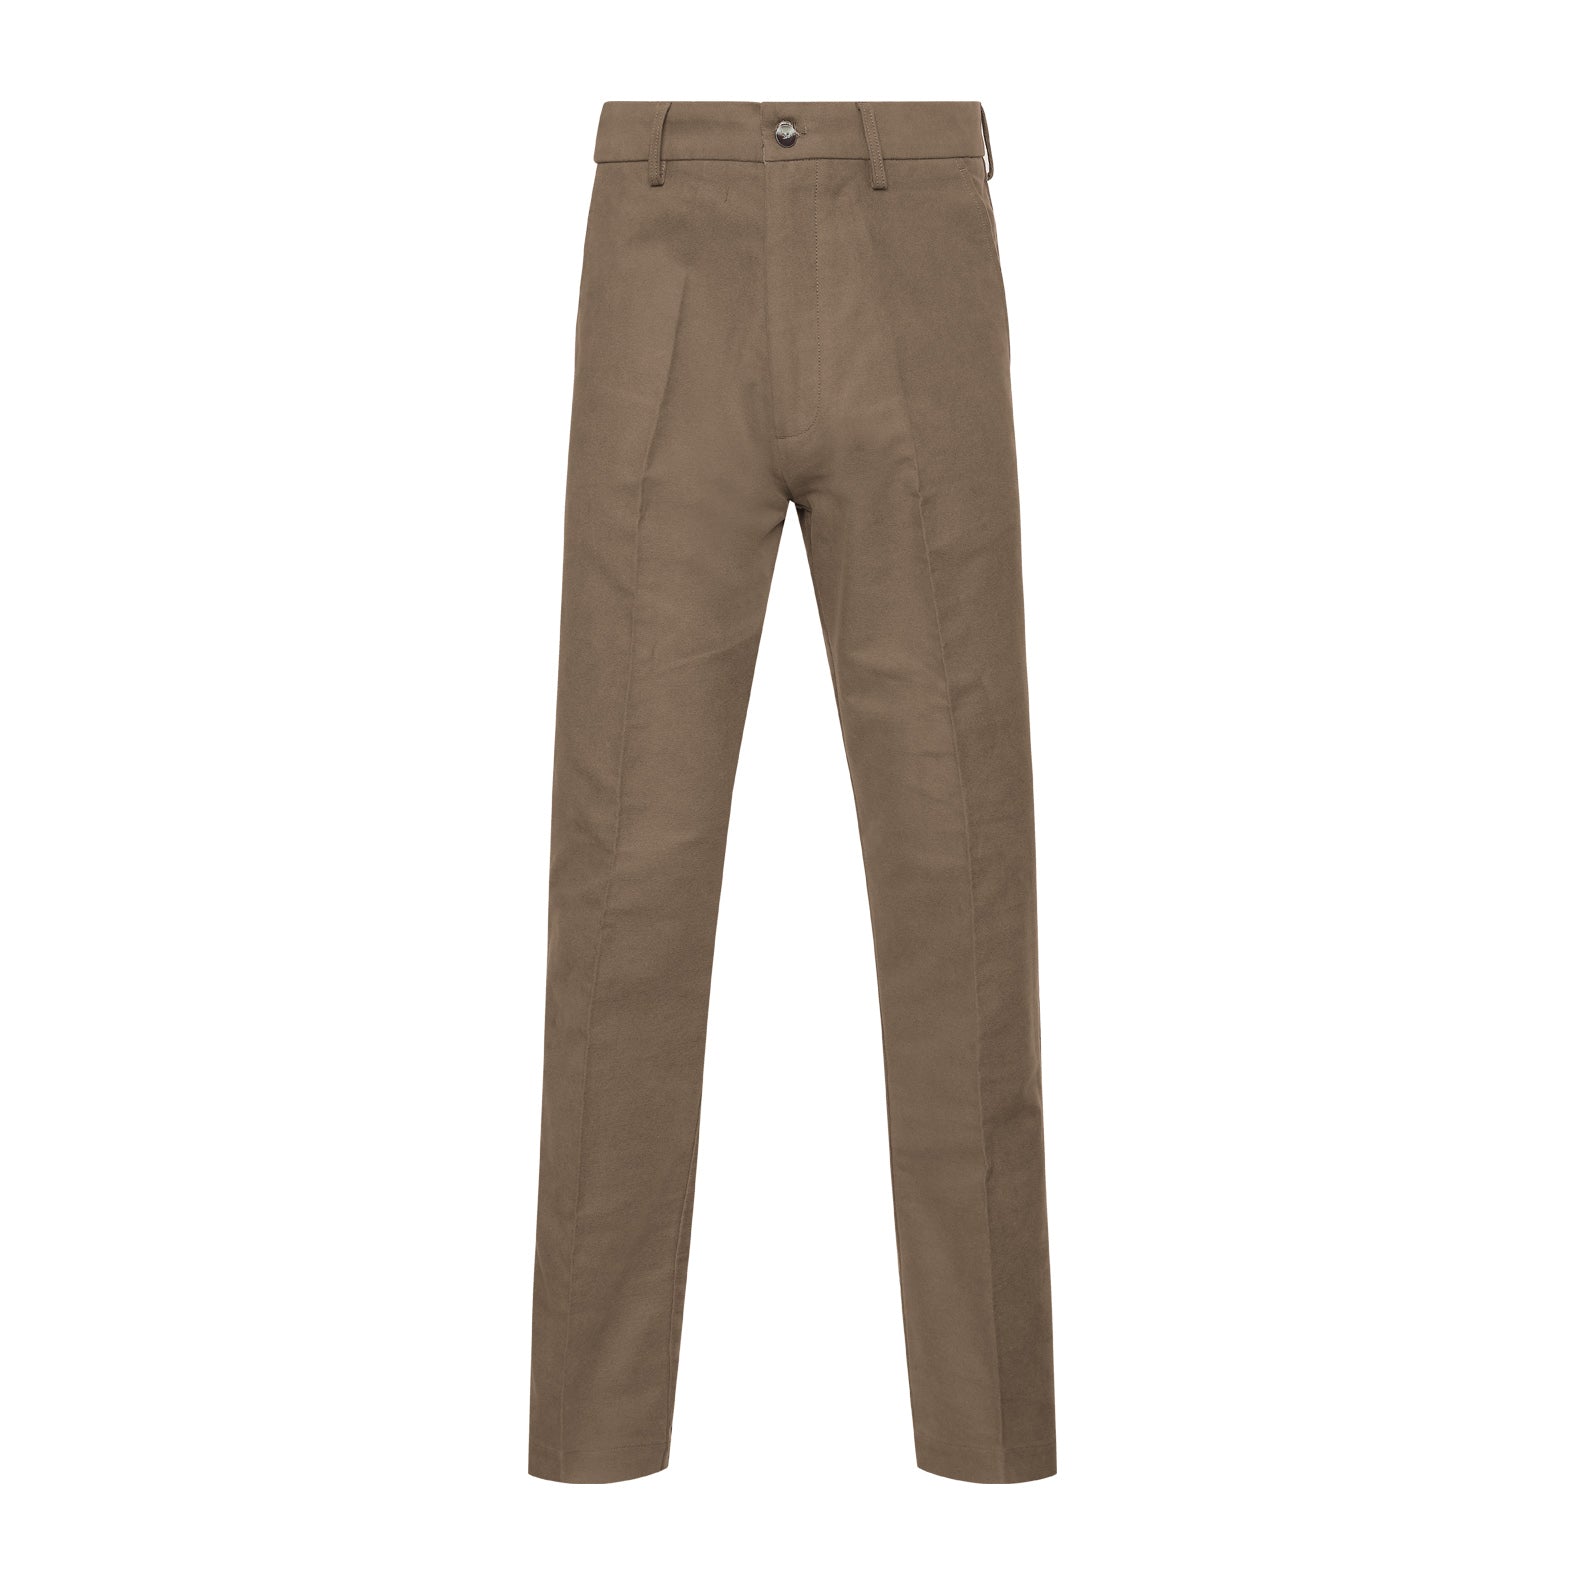 New Forest Moleskin Trousers - 100% Cotton, Smart Trousers – New Forest ...